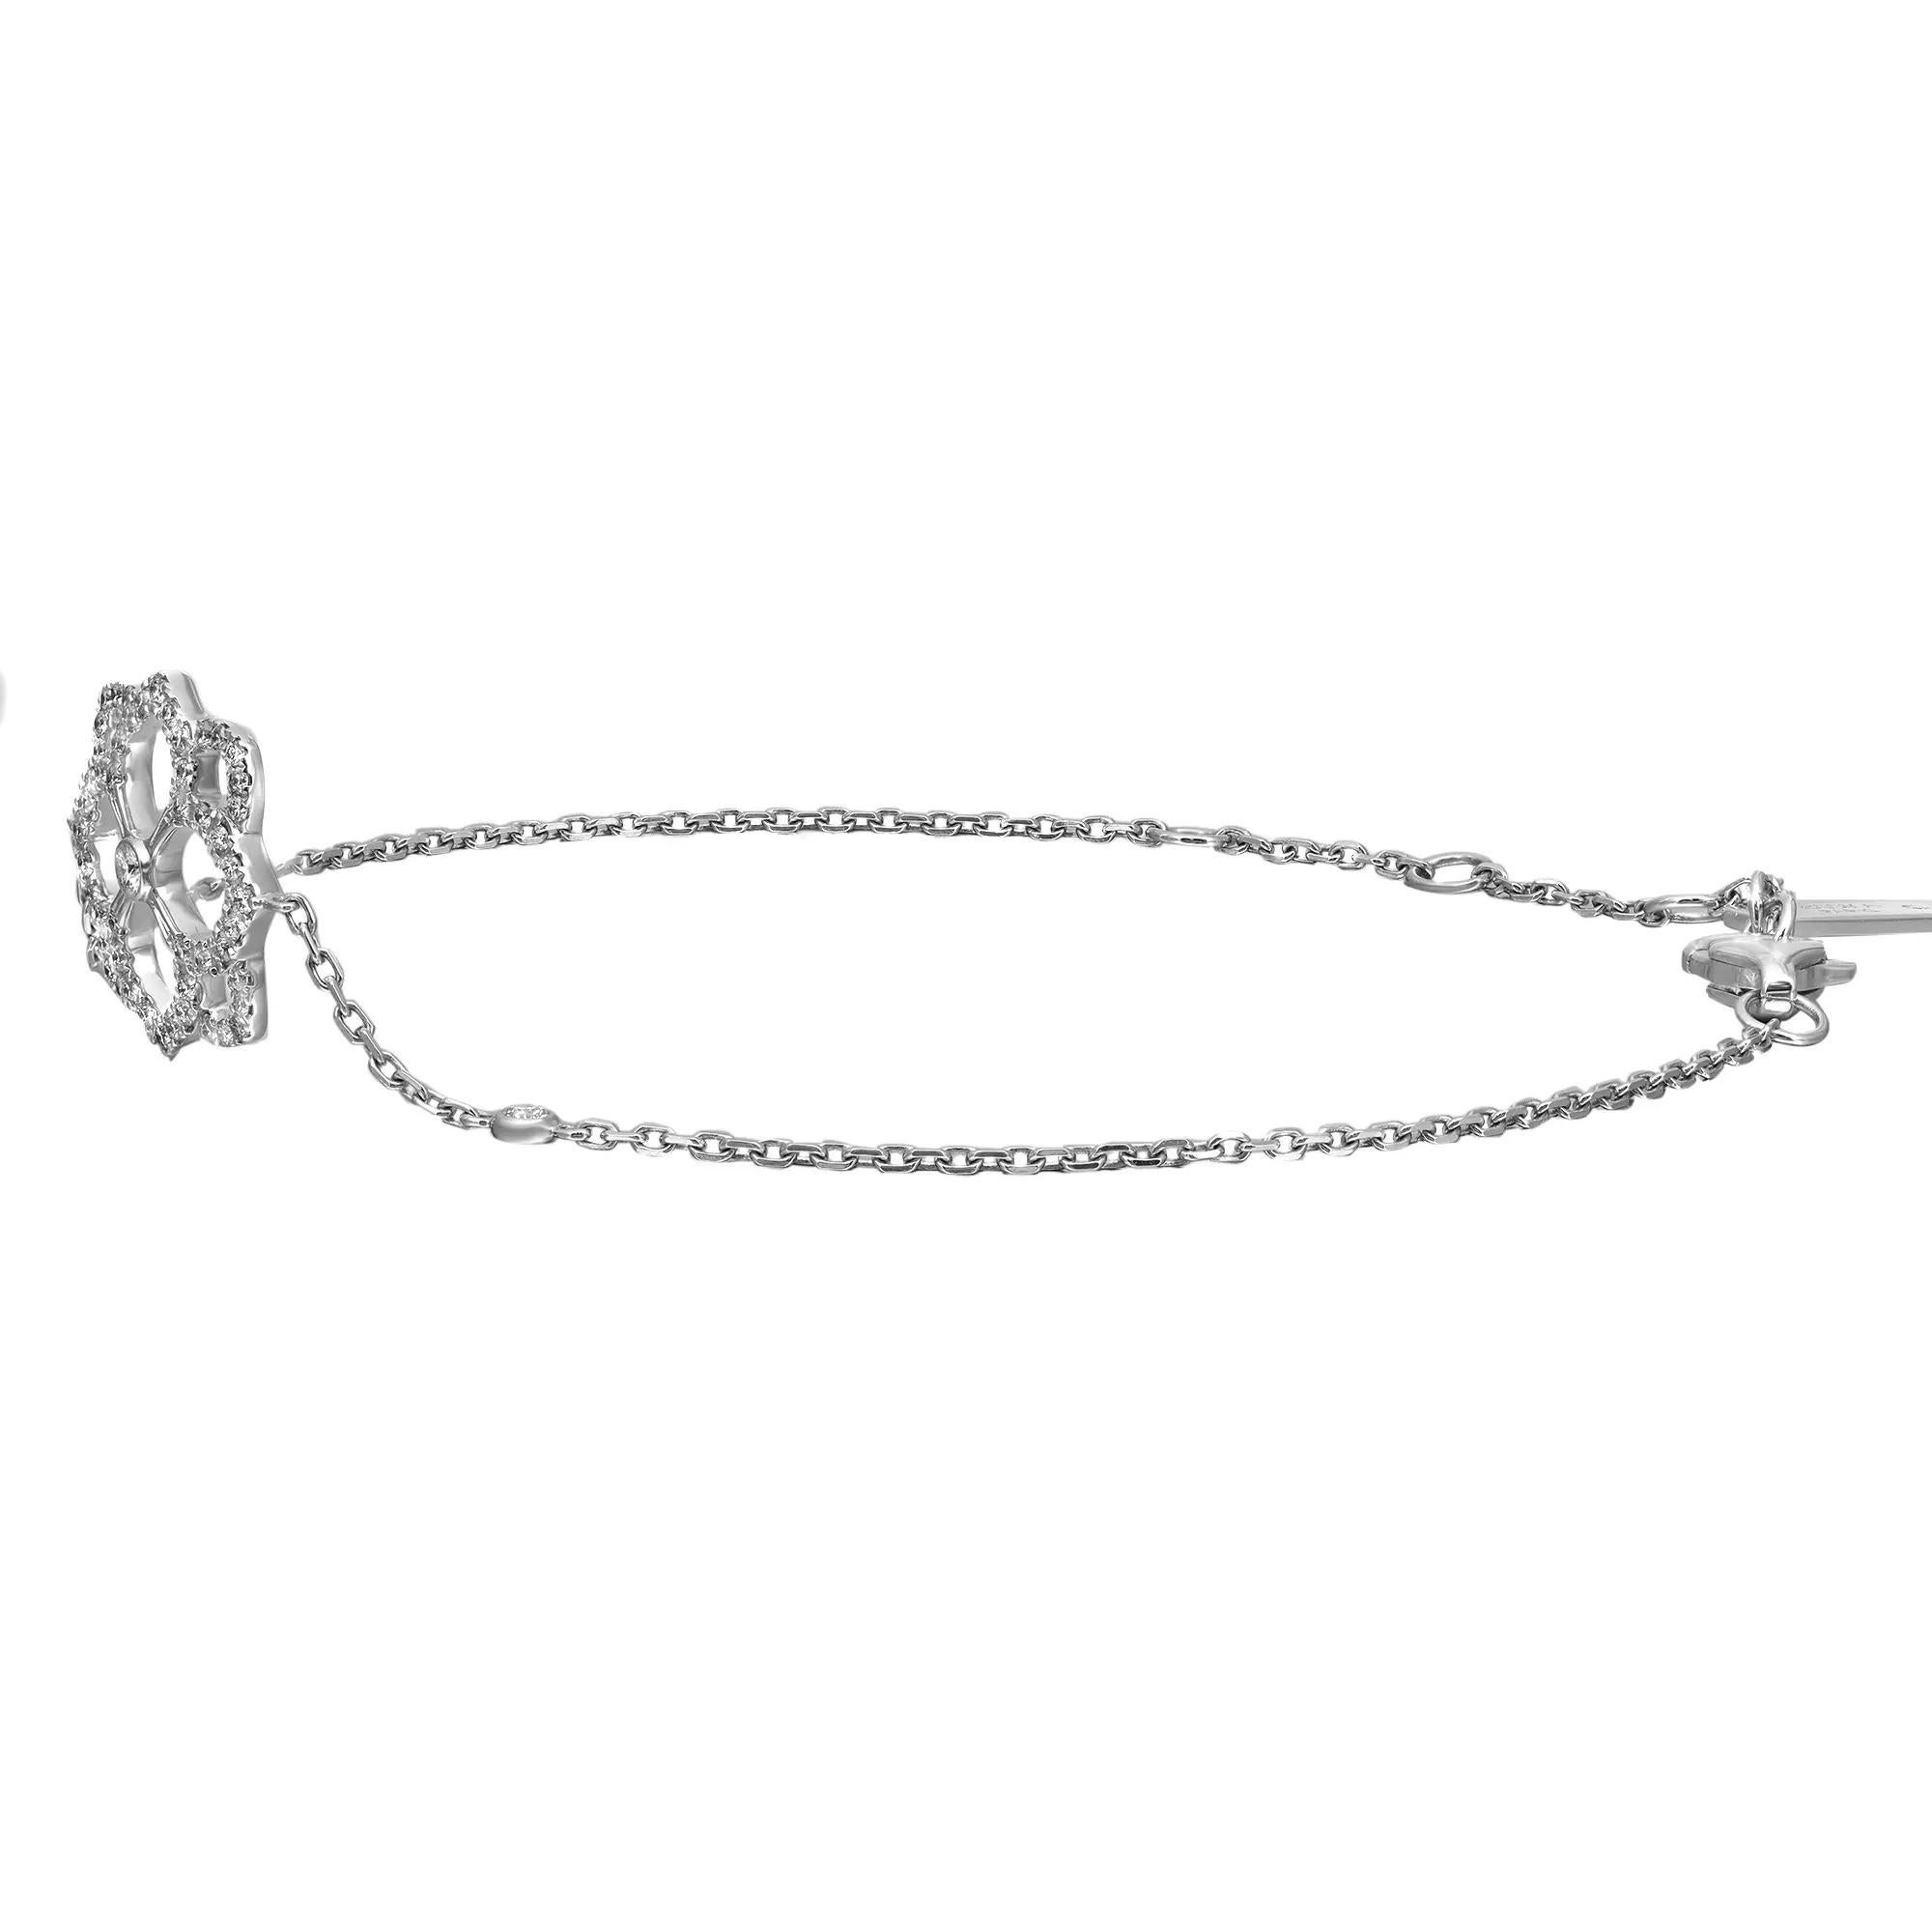 Delicate yet sturdy, this Messika Eden diamond chain bracelet is perfect for your everyday look. Crafted in high polish 18K white gold. It's stackable and easy to mix and match. This bracelet features a floral motif studded with round brilliant cut